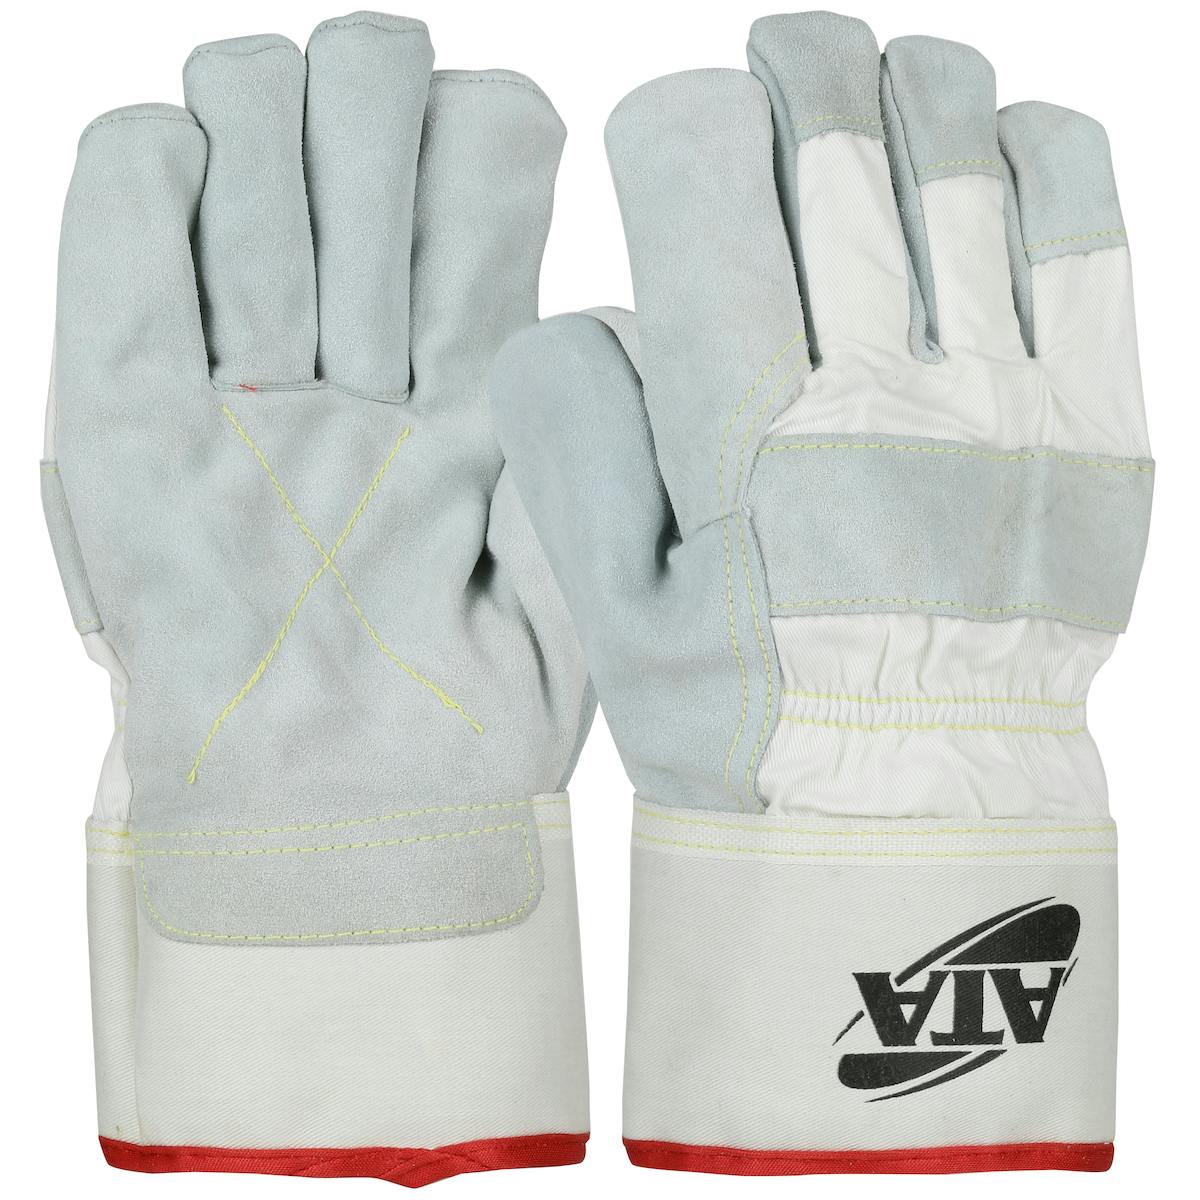 PIP® Split Cowhide Leather Palm Glove with Canvas Back and ATA® Technology Lining - Safety Cuff (MJVATA)